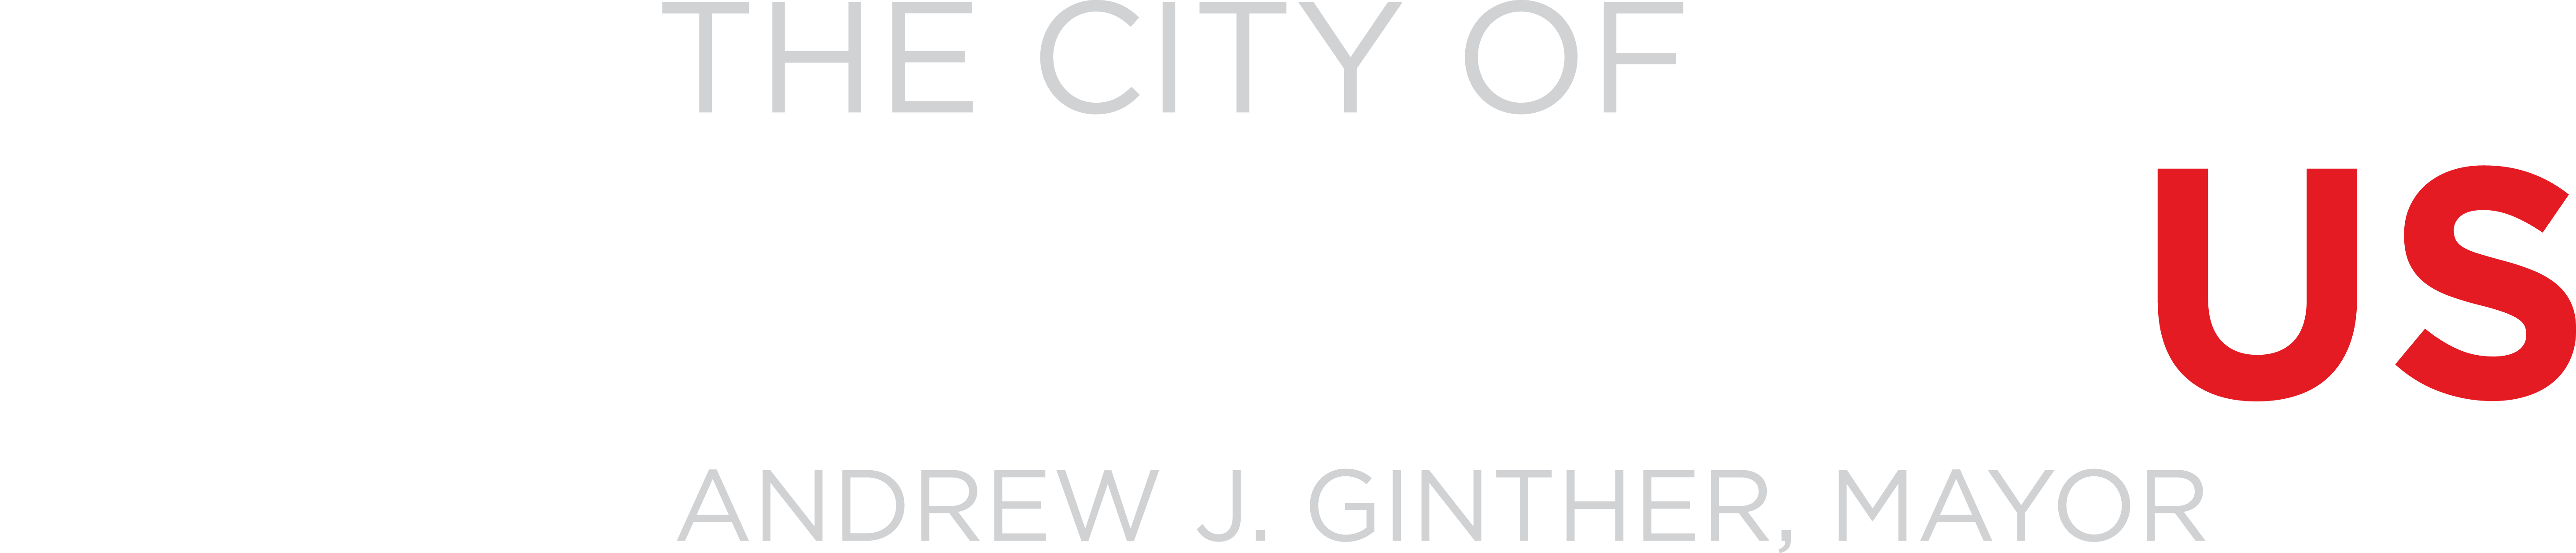 City of Columbus 311 Service Requests logo